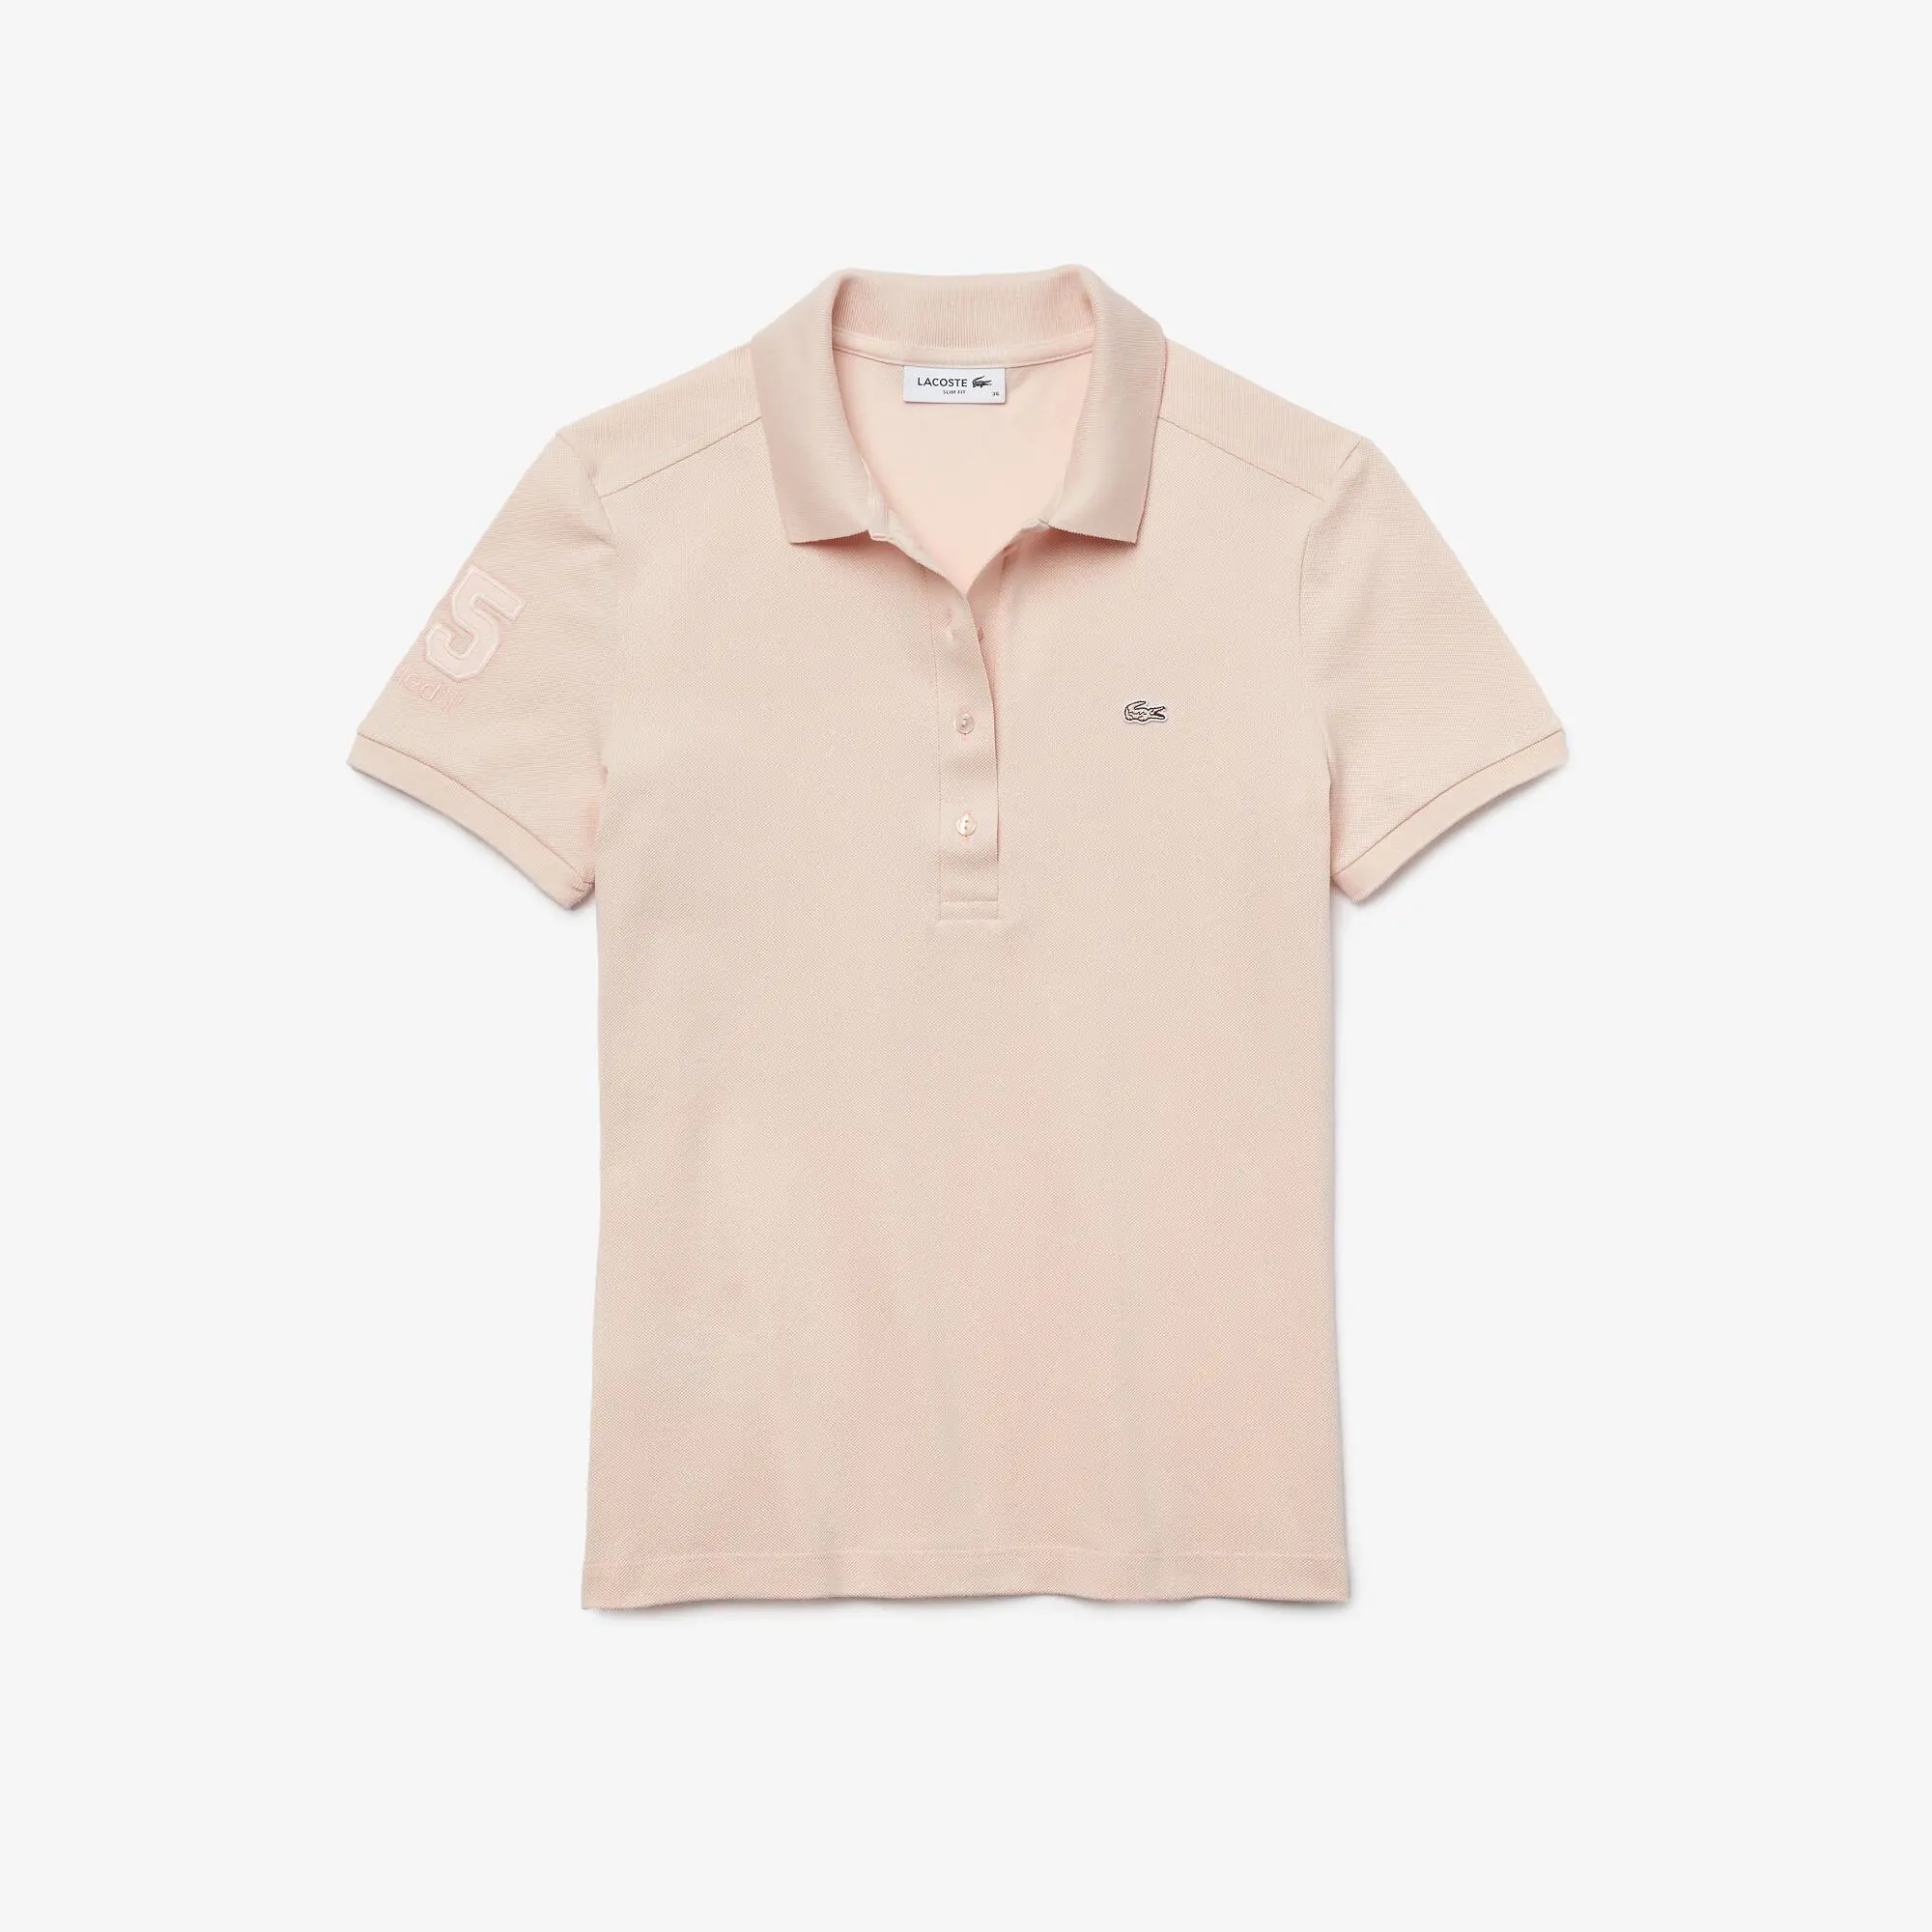 Lacoste Women’s Lacoste x Club Med Cotton Polo Shirt. 2